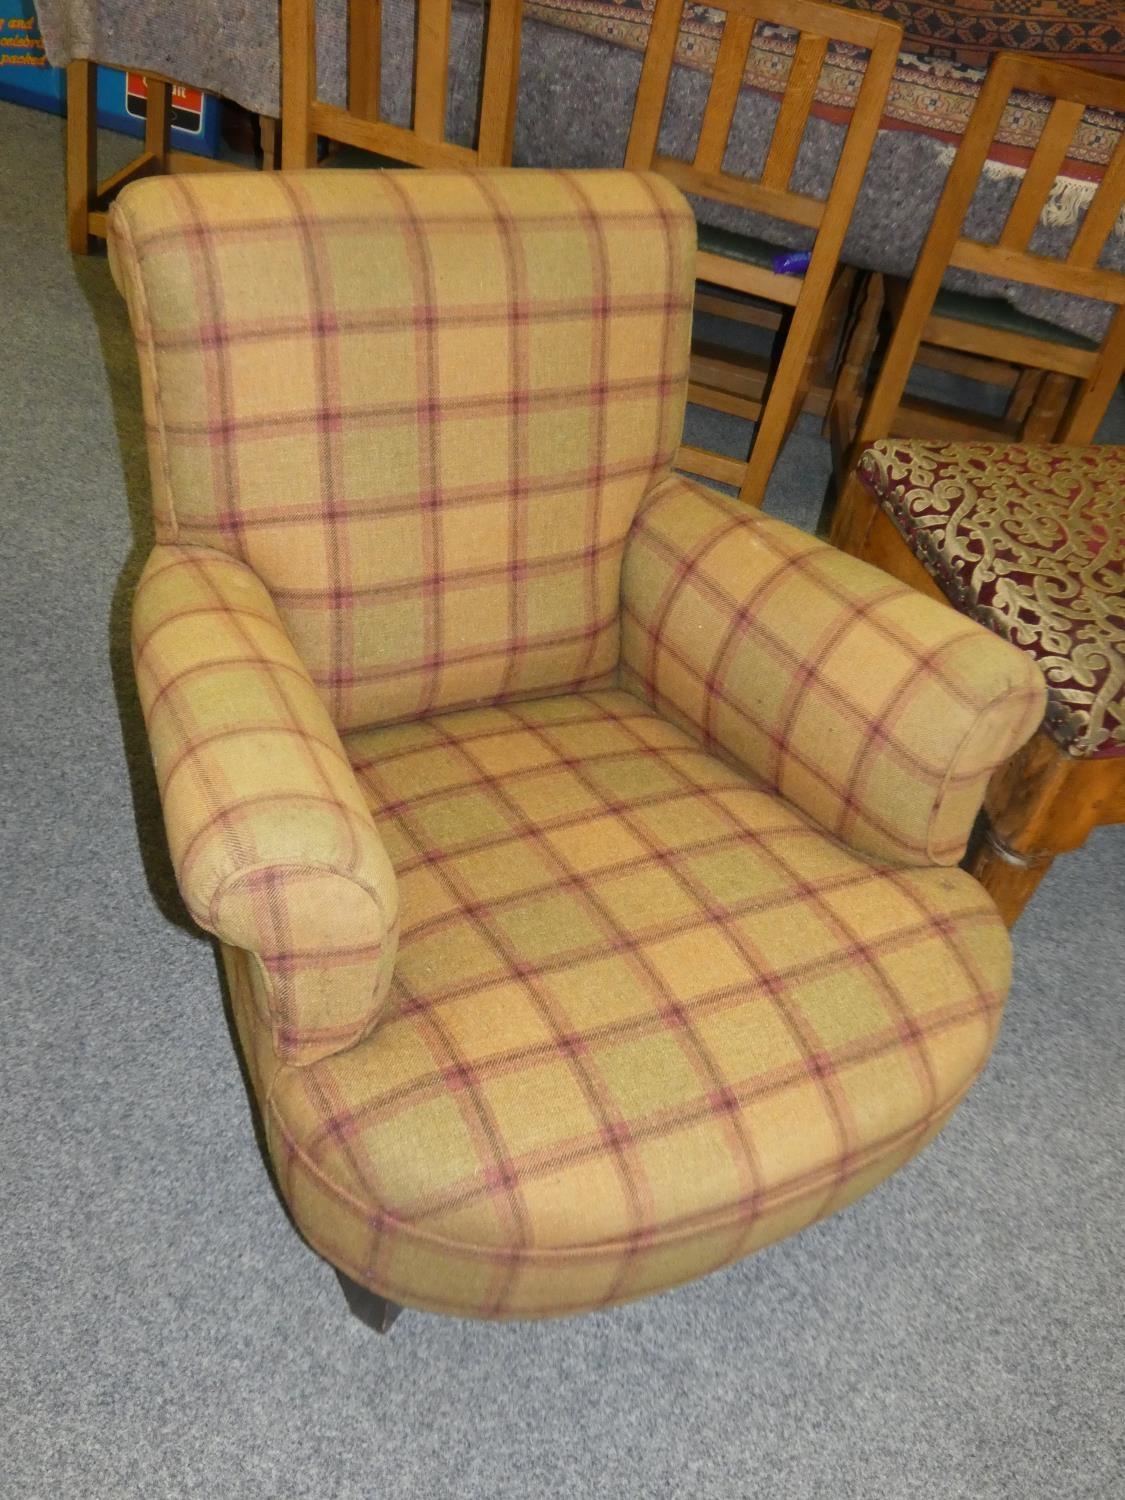 A 19th century mahogany framed generous arm chair, upholstered in tartan fabric.